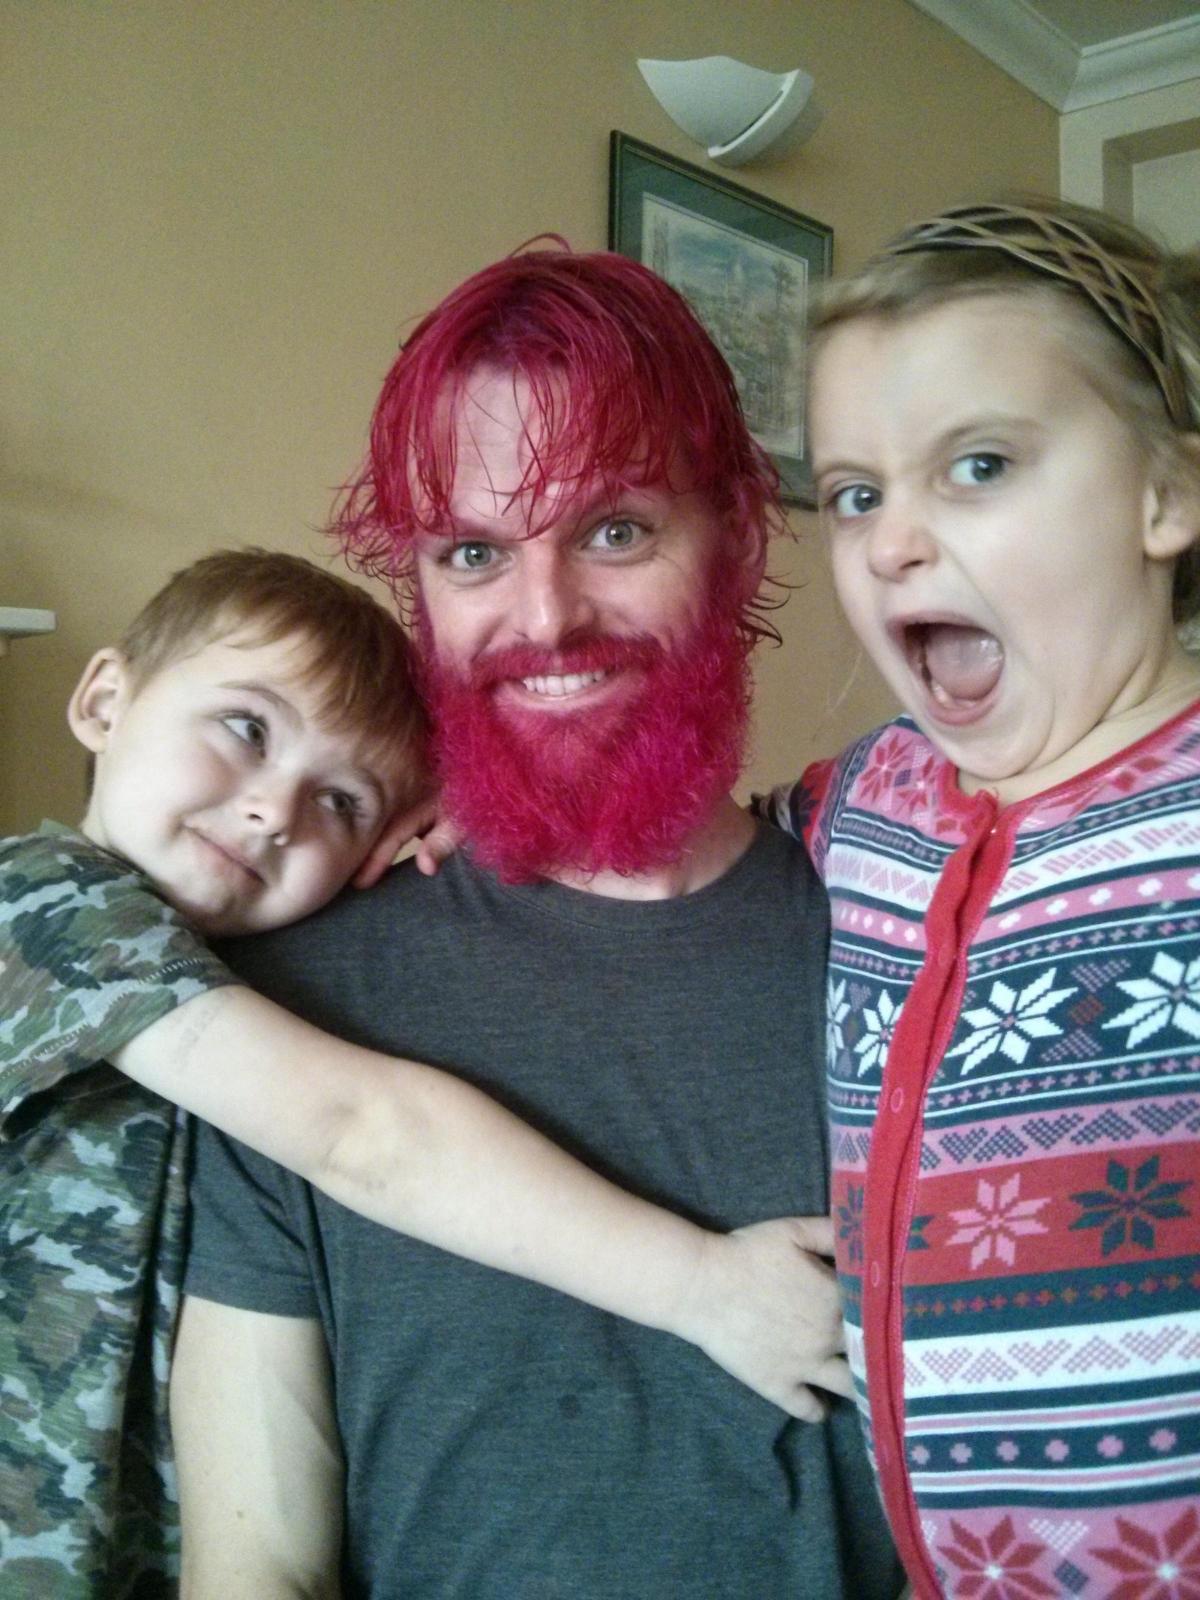 Having grown his all hair, Matt Ketteringham, IT Consultant at Provident Financial, allowed his children to dye it all pink (including eyebrows!) for Comic Relief and has embarked on gradual shaving sessions to culminate in no hair at all today